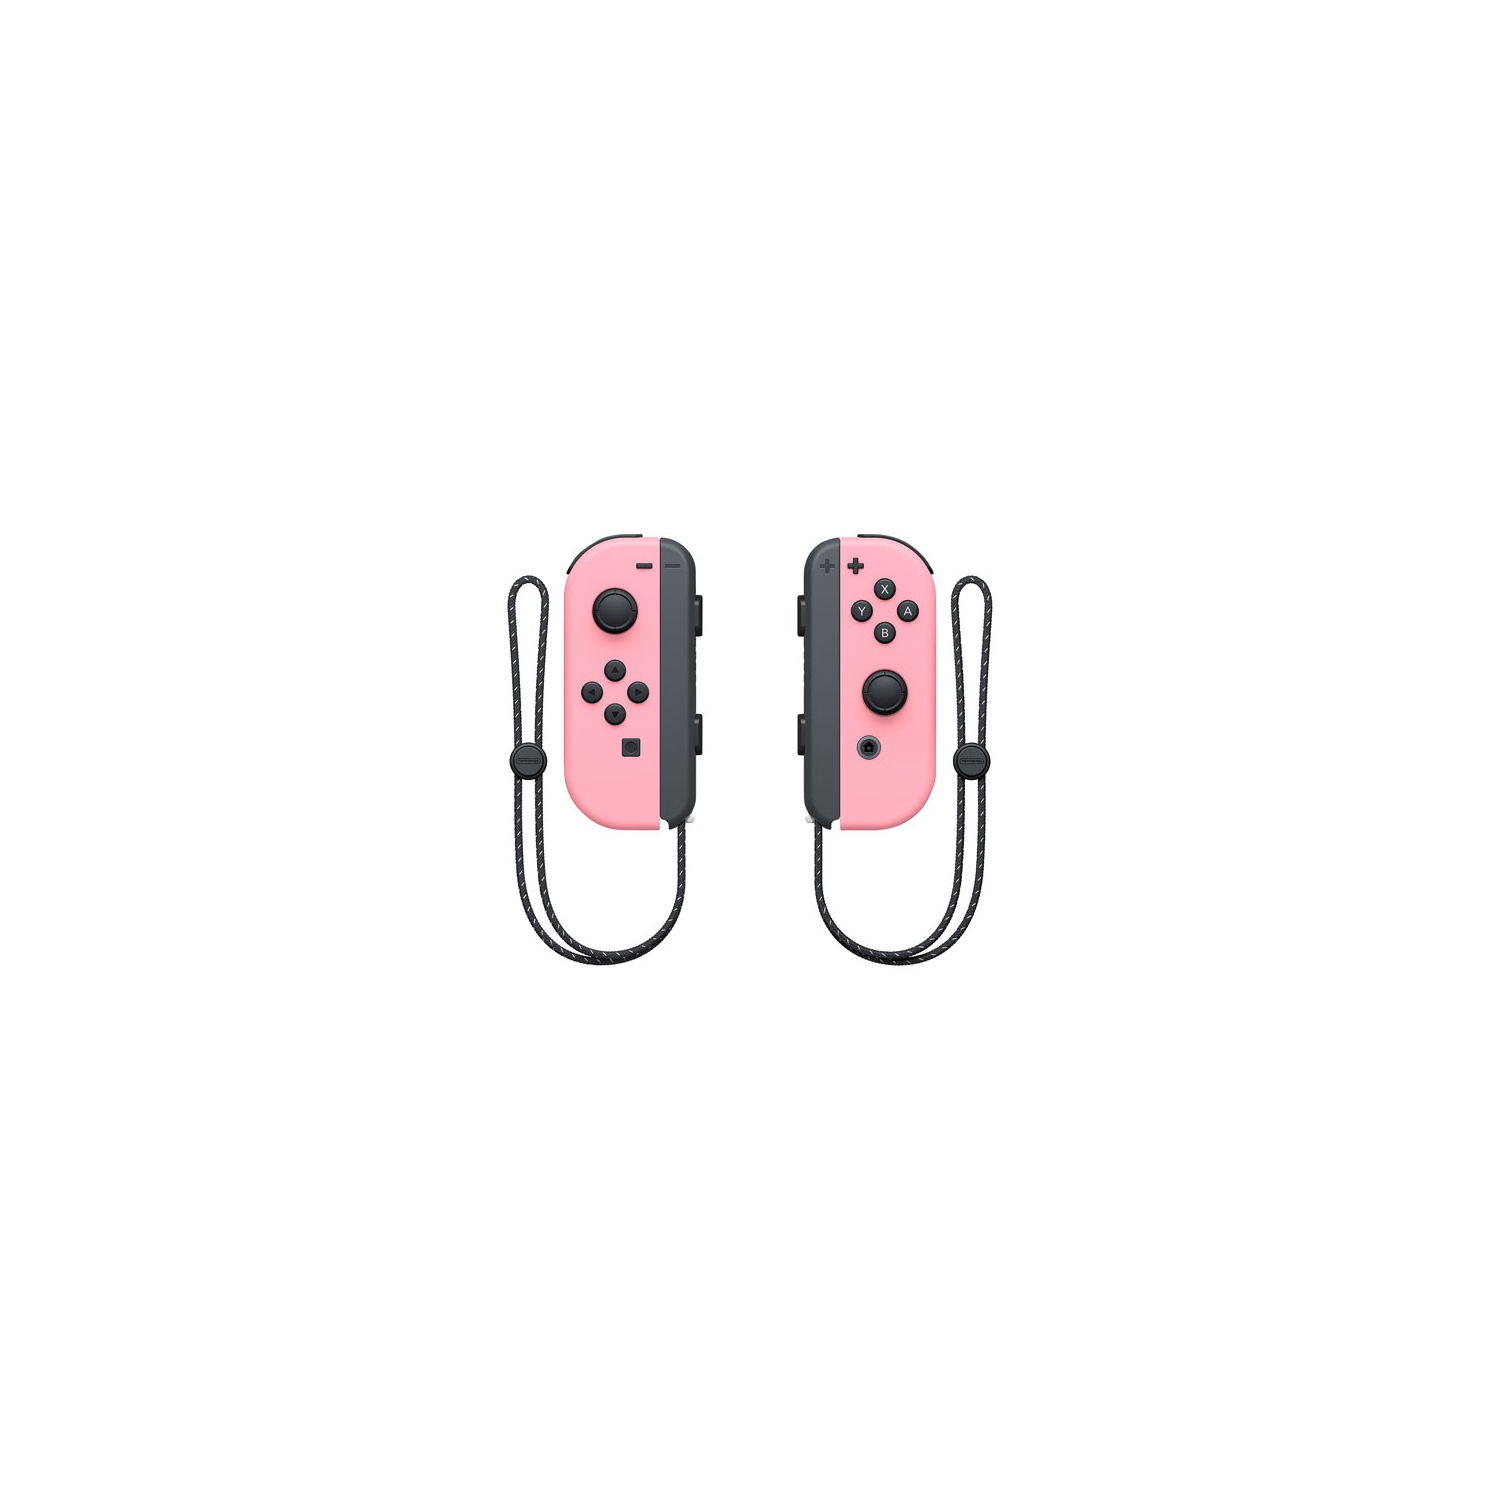 Refurbished (Good) Nintendo Switch Left and Right Joy-Con Controllers - Pastel Pink